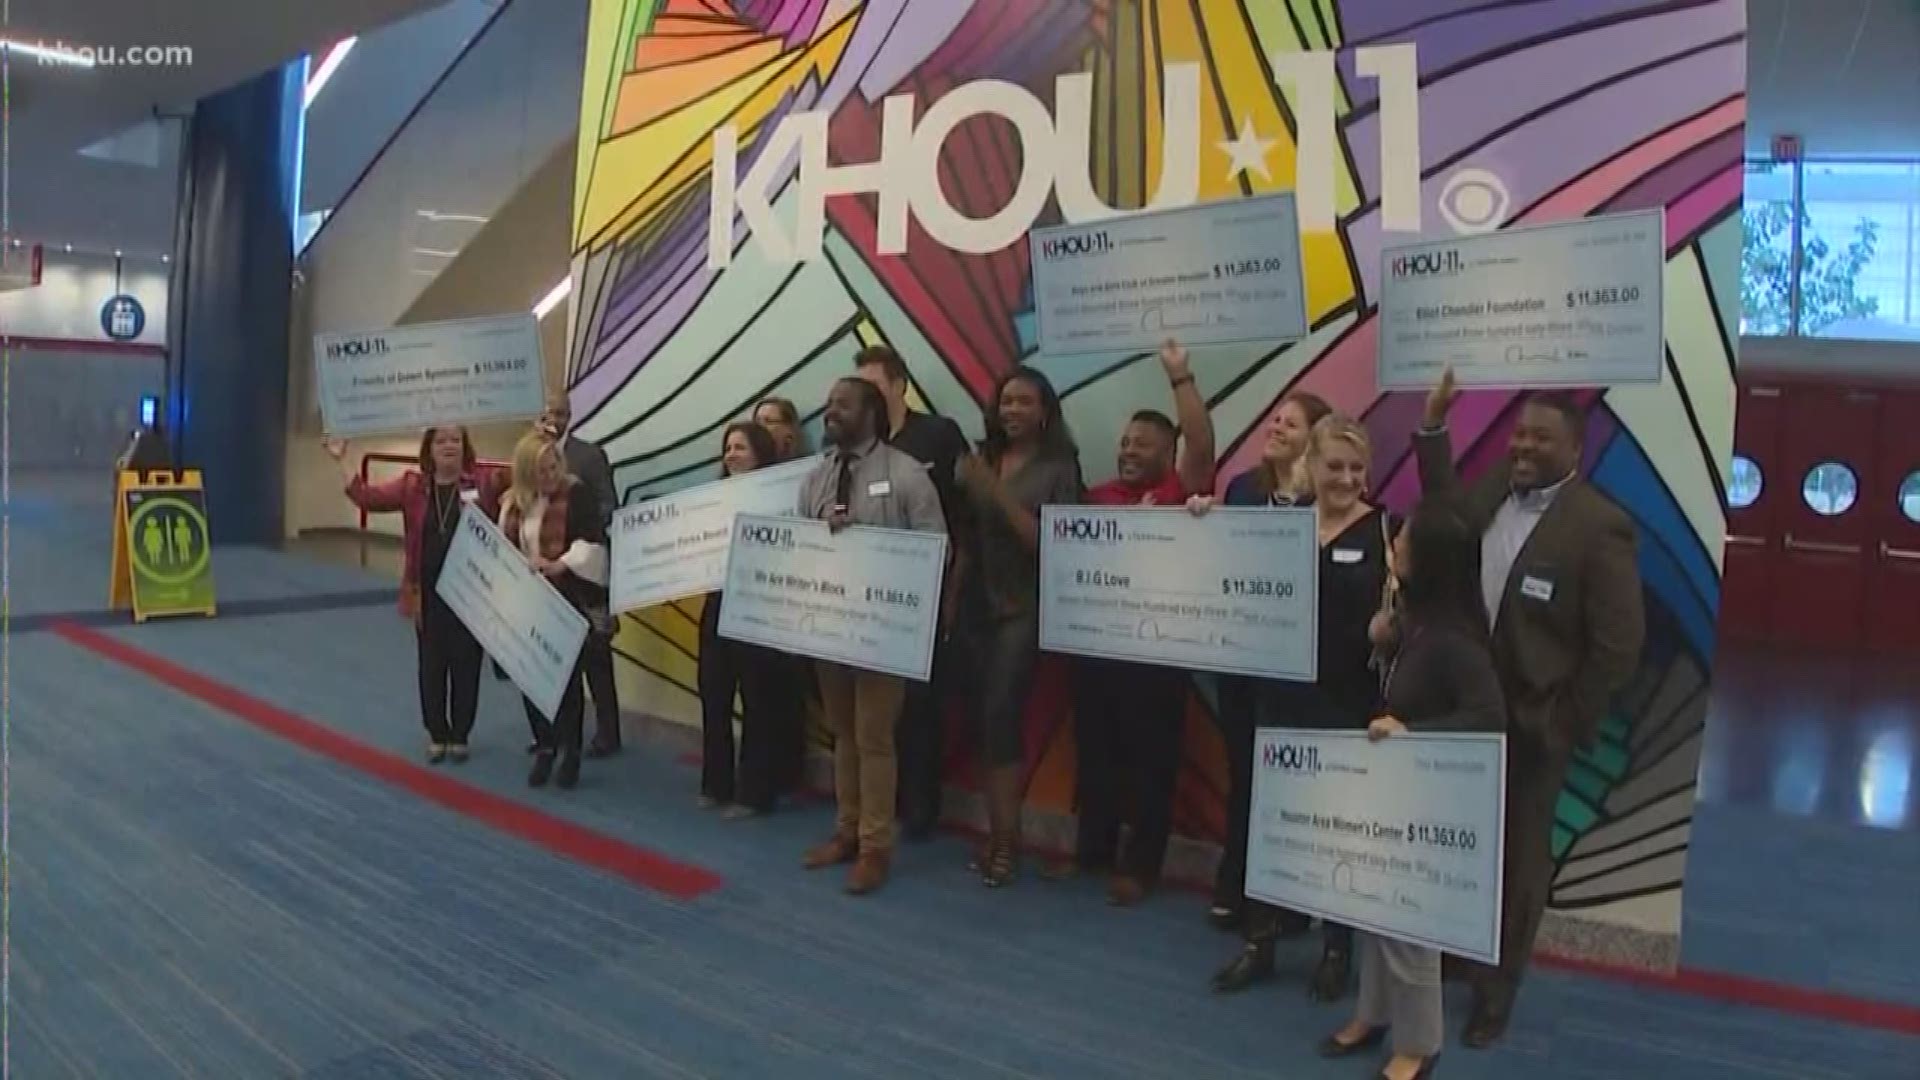 KHOU 11 surprised 11 different charitable groups outside our new Avenida studio with grants of more than $11,000 dollars each Monday.